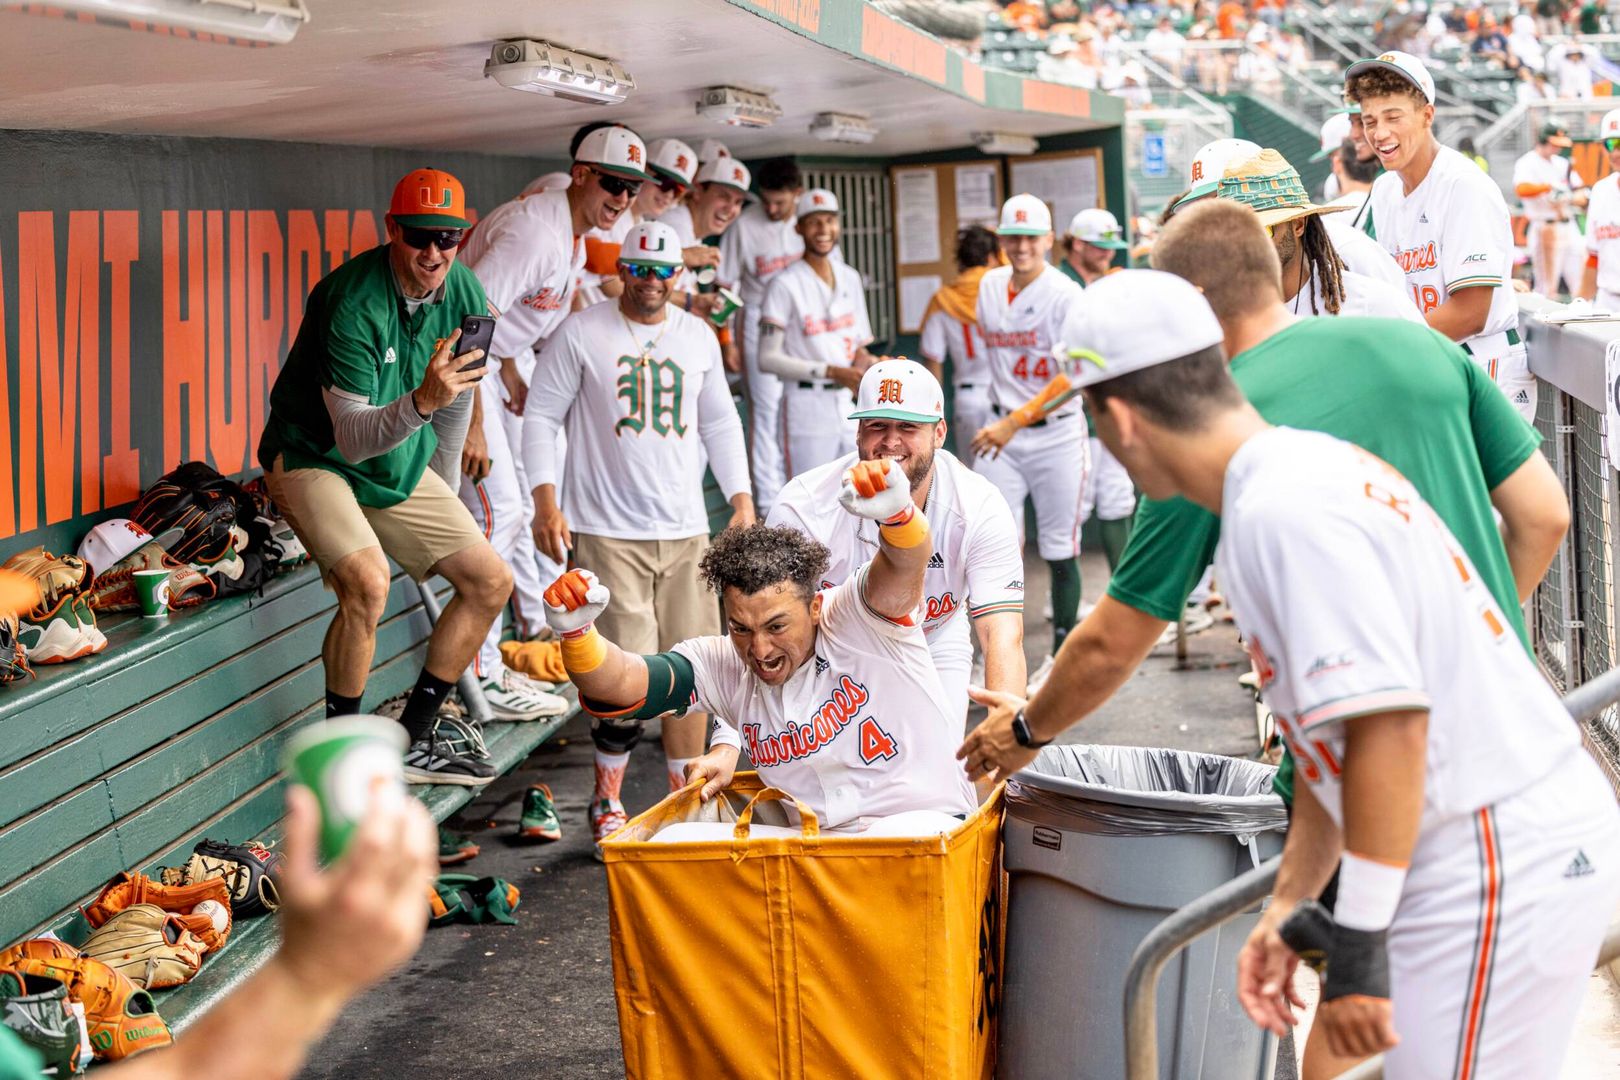 Ninth-ranked Canes Cap off Regular Season with 16-7 Win over No. 14 Notre Dame